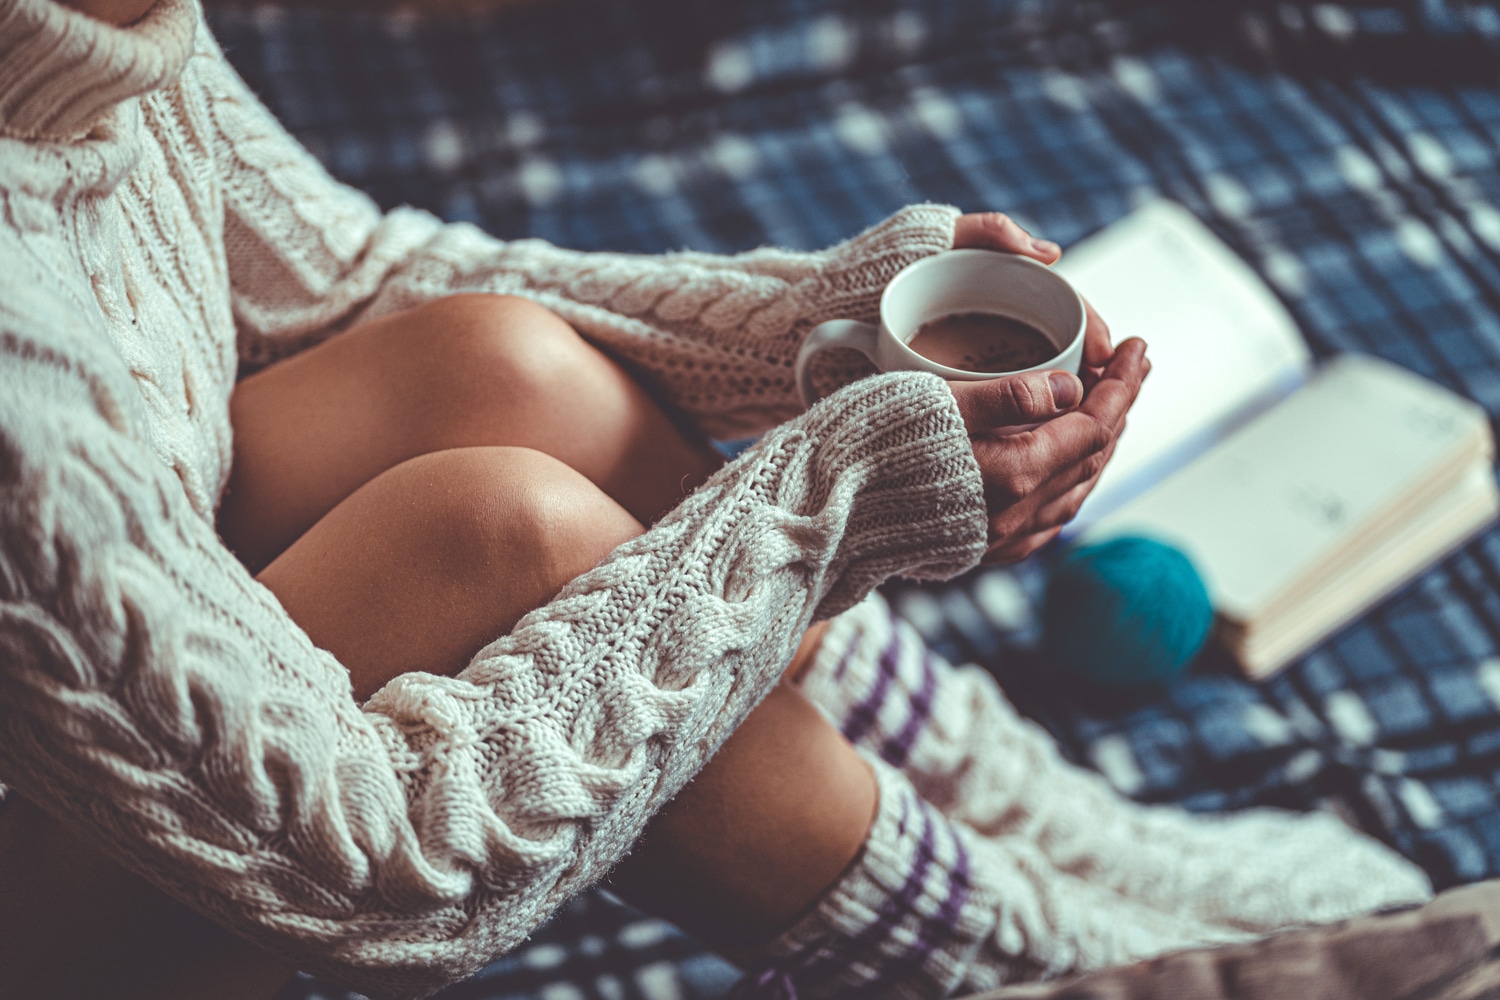 hot and healthy beverages for winter. Girl holding a mug